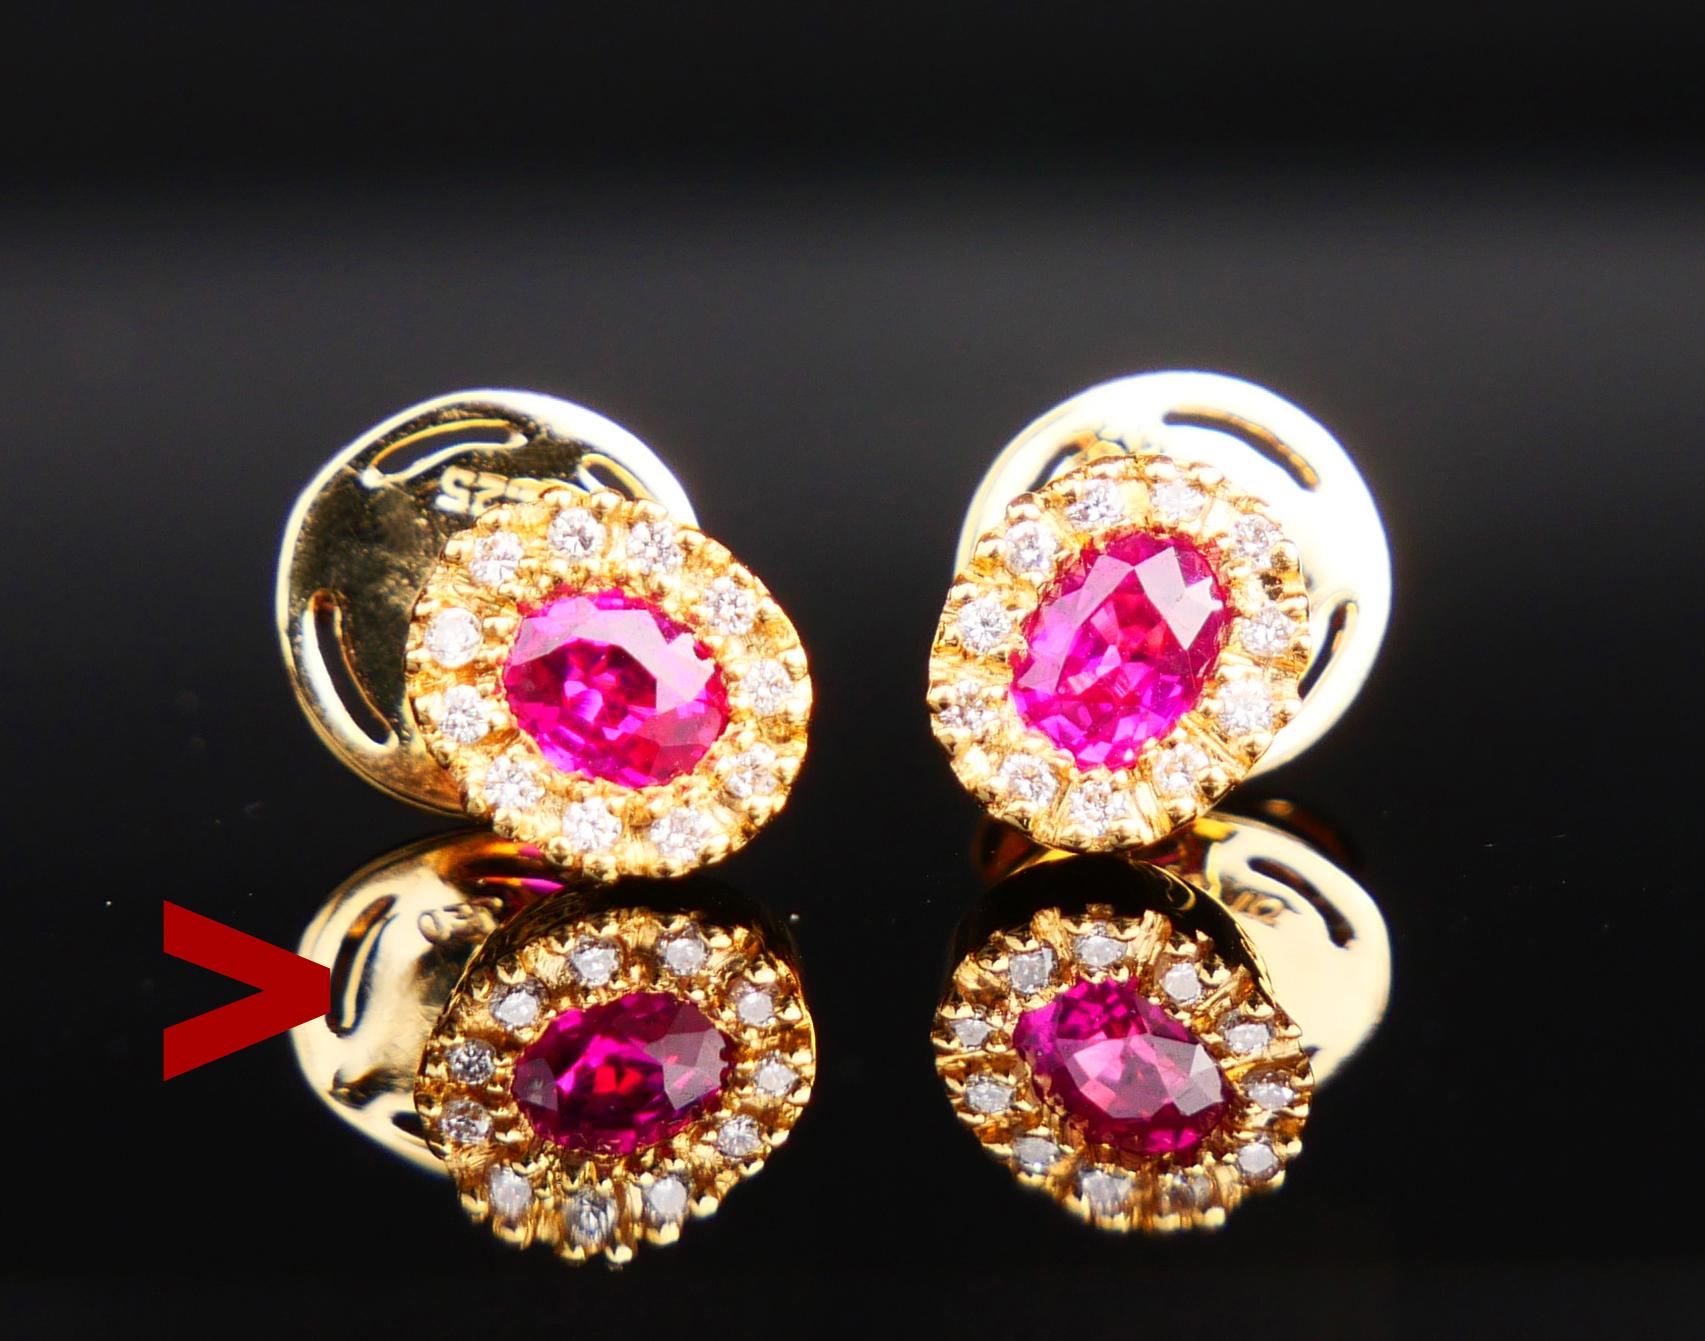 A pair of fine halo studs from 1970s in solid 18K Yellow featuring two oval cut natural oval cut rosy Red Rubies 4. x 3 mm / ca. 025 ct each,

both clear and of good transparency and demonstrate inclusions typical for naturals.

Each Ruby is